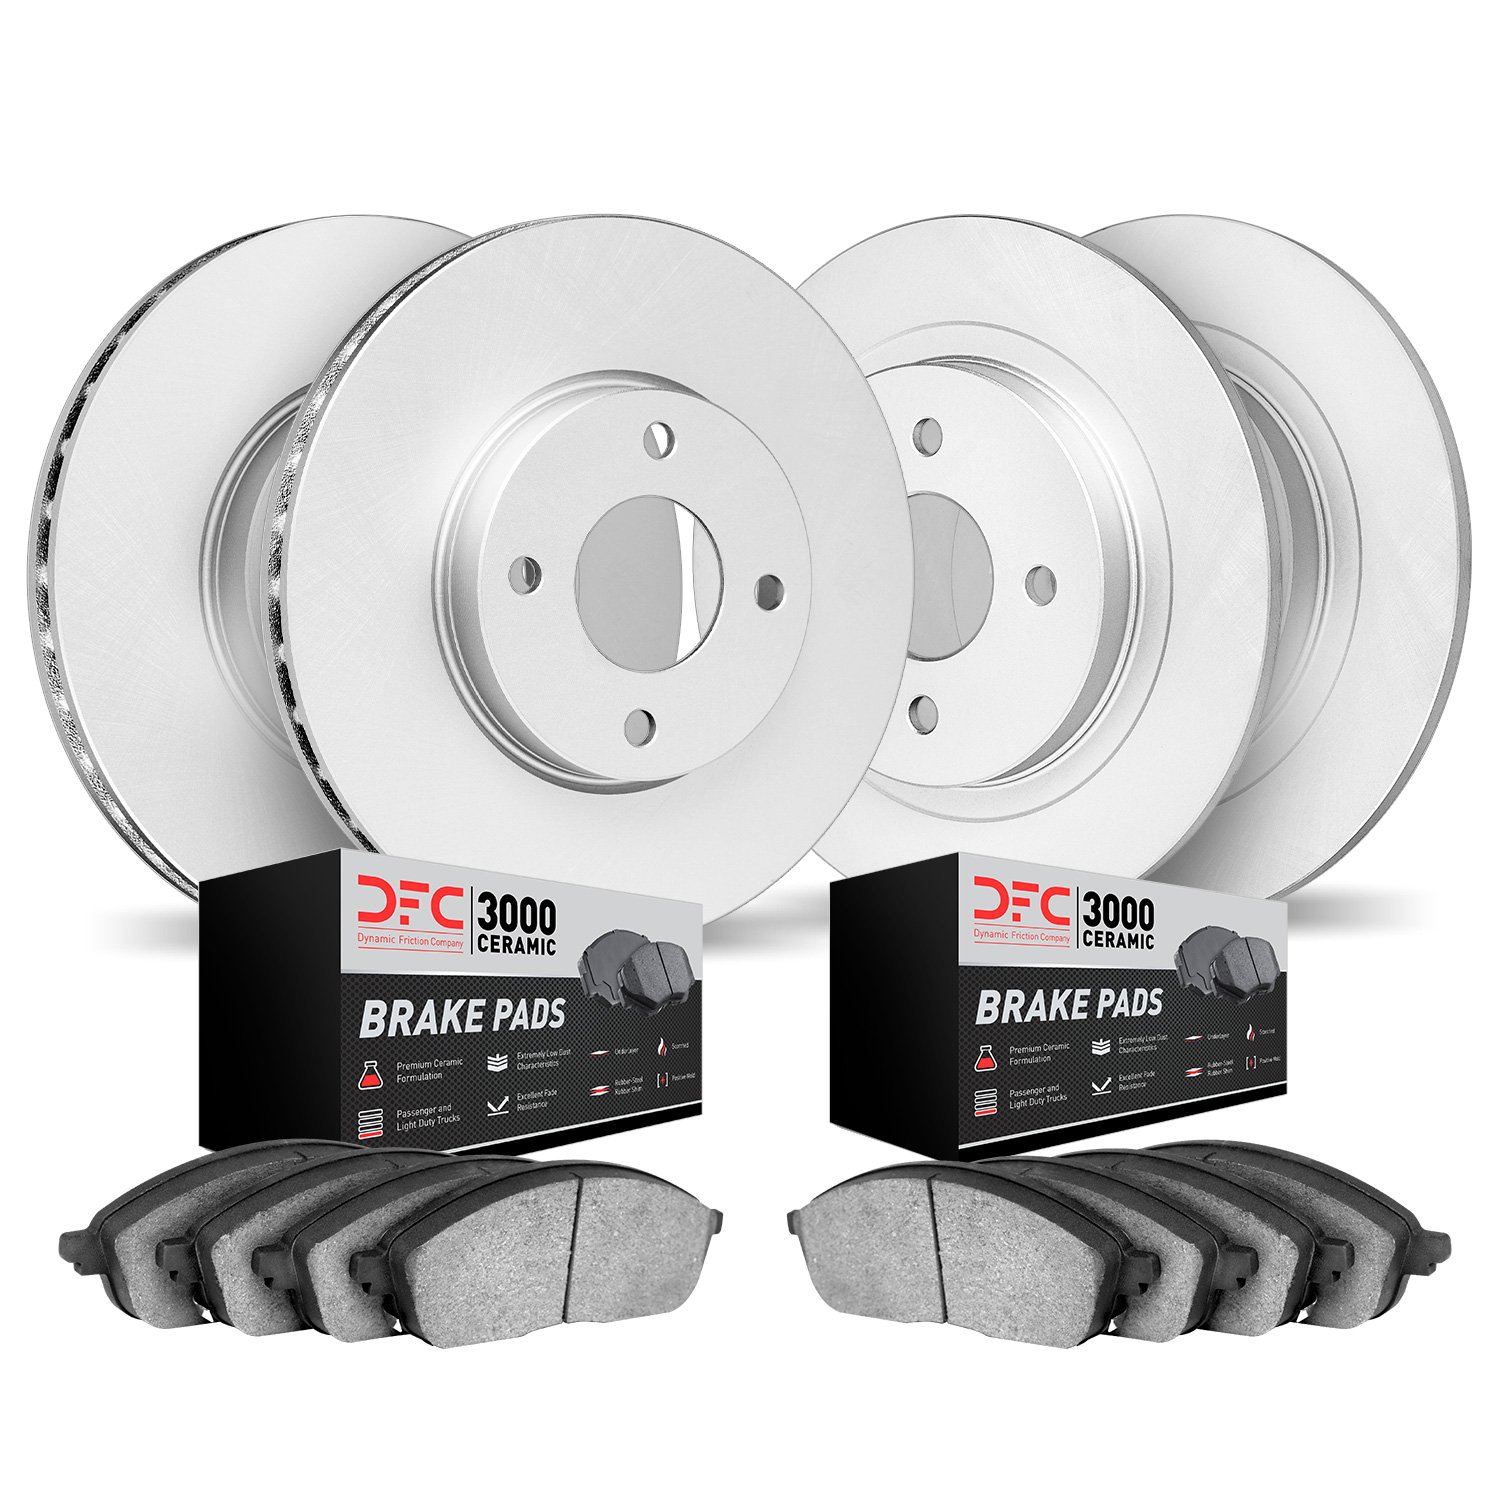 4304-59005 Geospec Brake Rotors with 3000-Series Ceramic Brake Pads Kit, 1992-1997 Acura/Honda, Position: Front and Rear